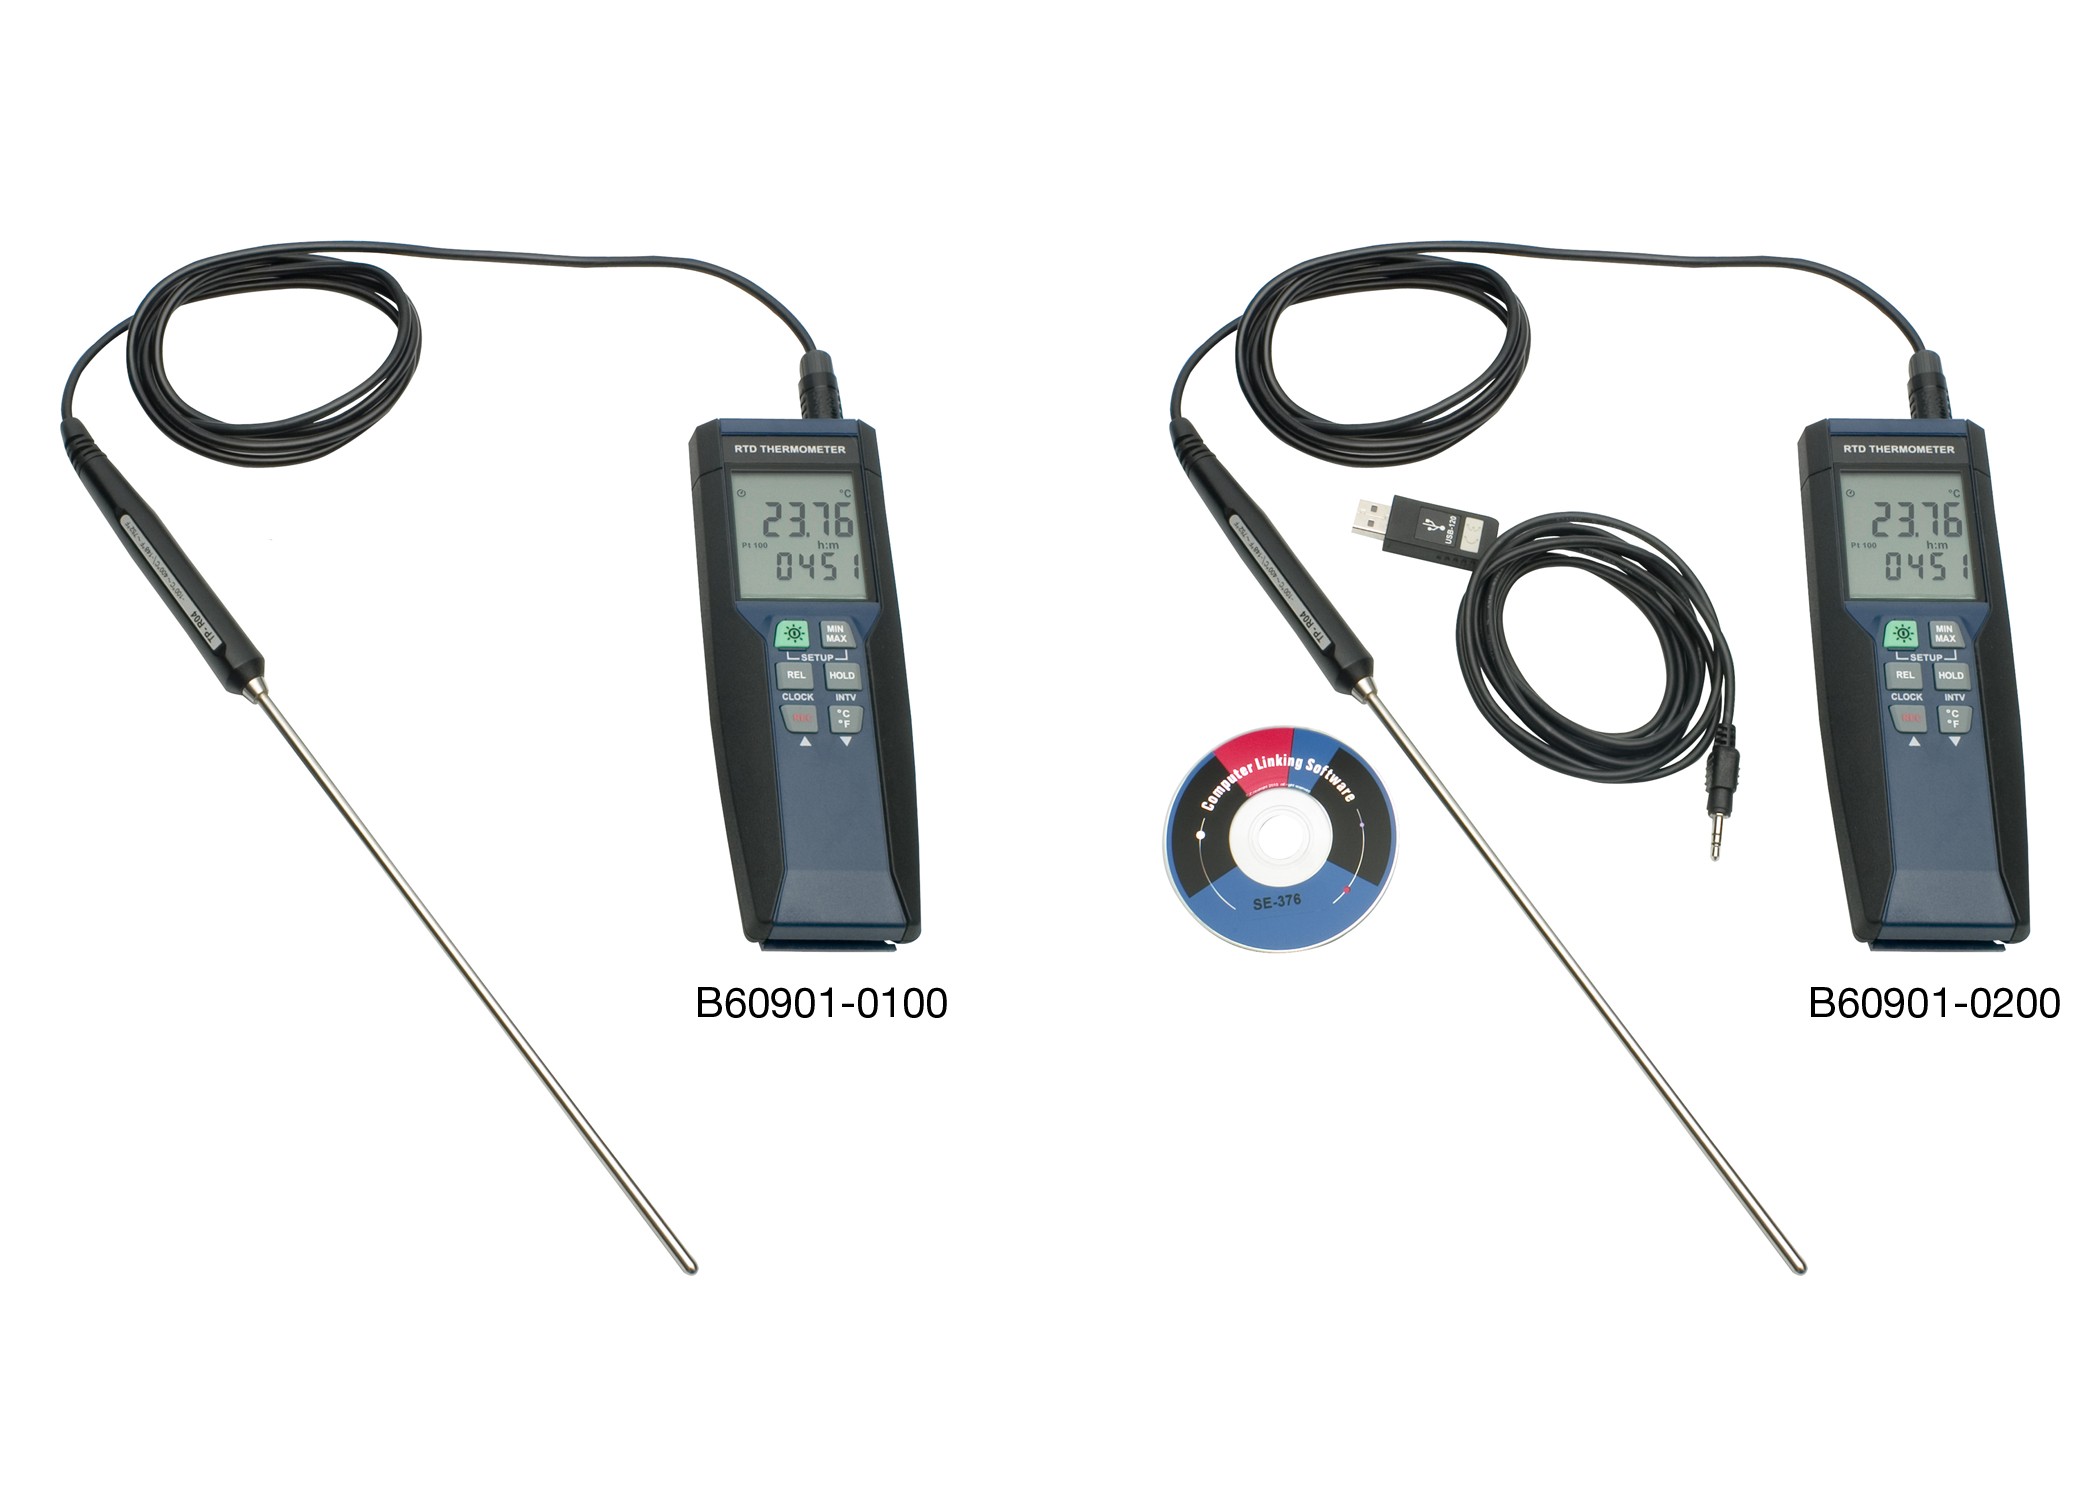 H-B DURAC High Temp Precision RTD Thermometer and Thermometer / Data Logger with Individual Calibration Report; -100 to 400°C (-148 to 752°F)